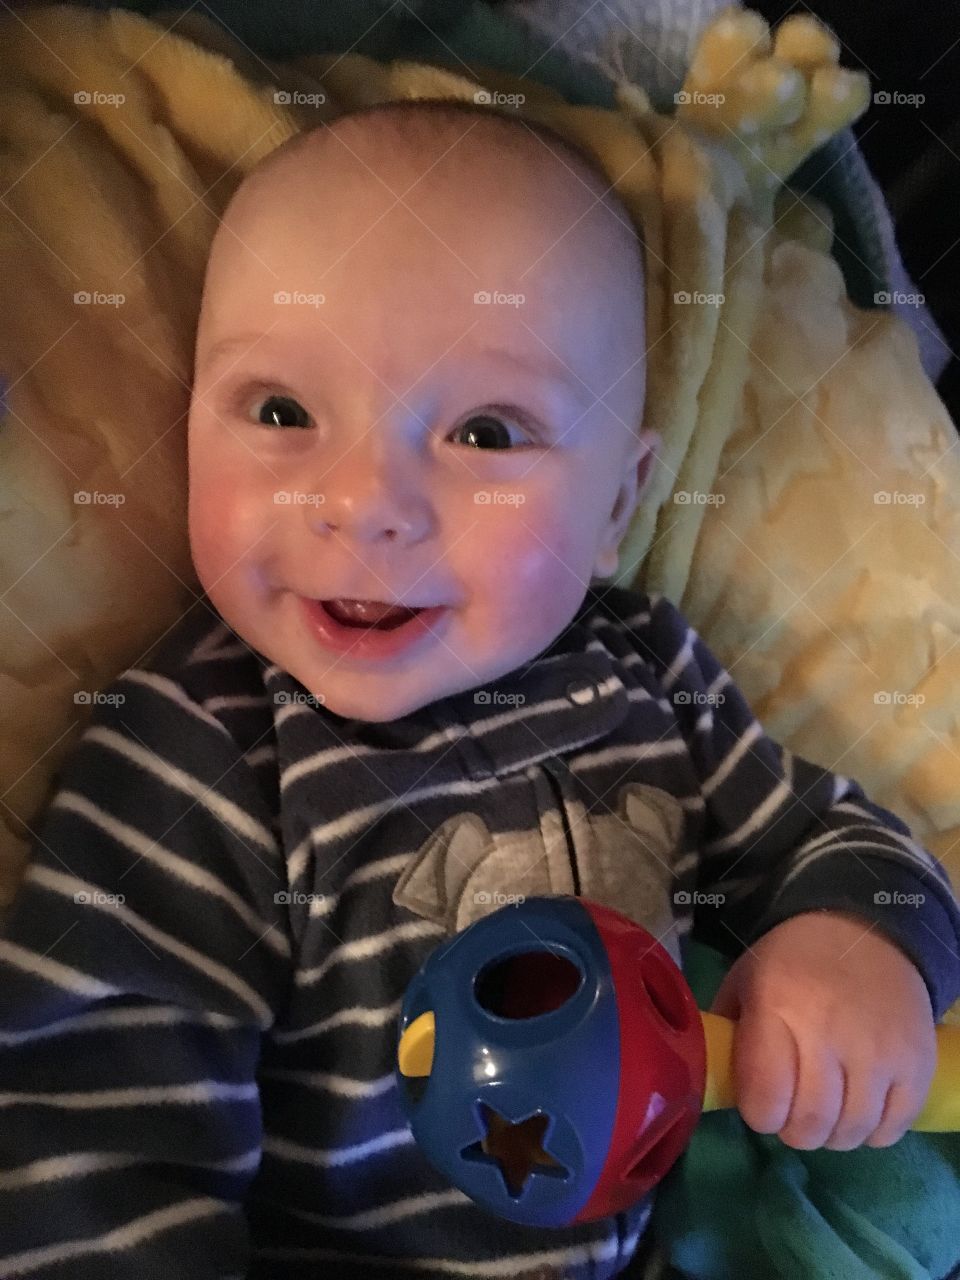 Smiling baby lying in bed and holding toy